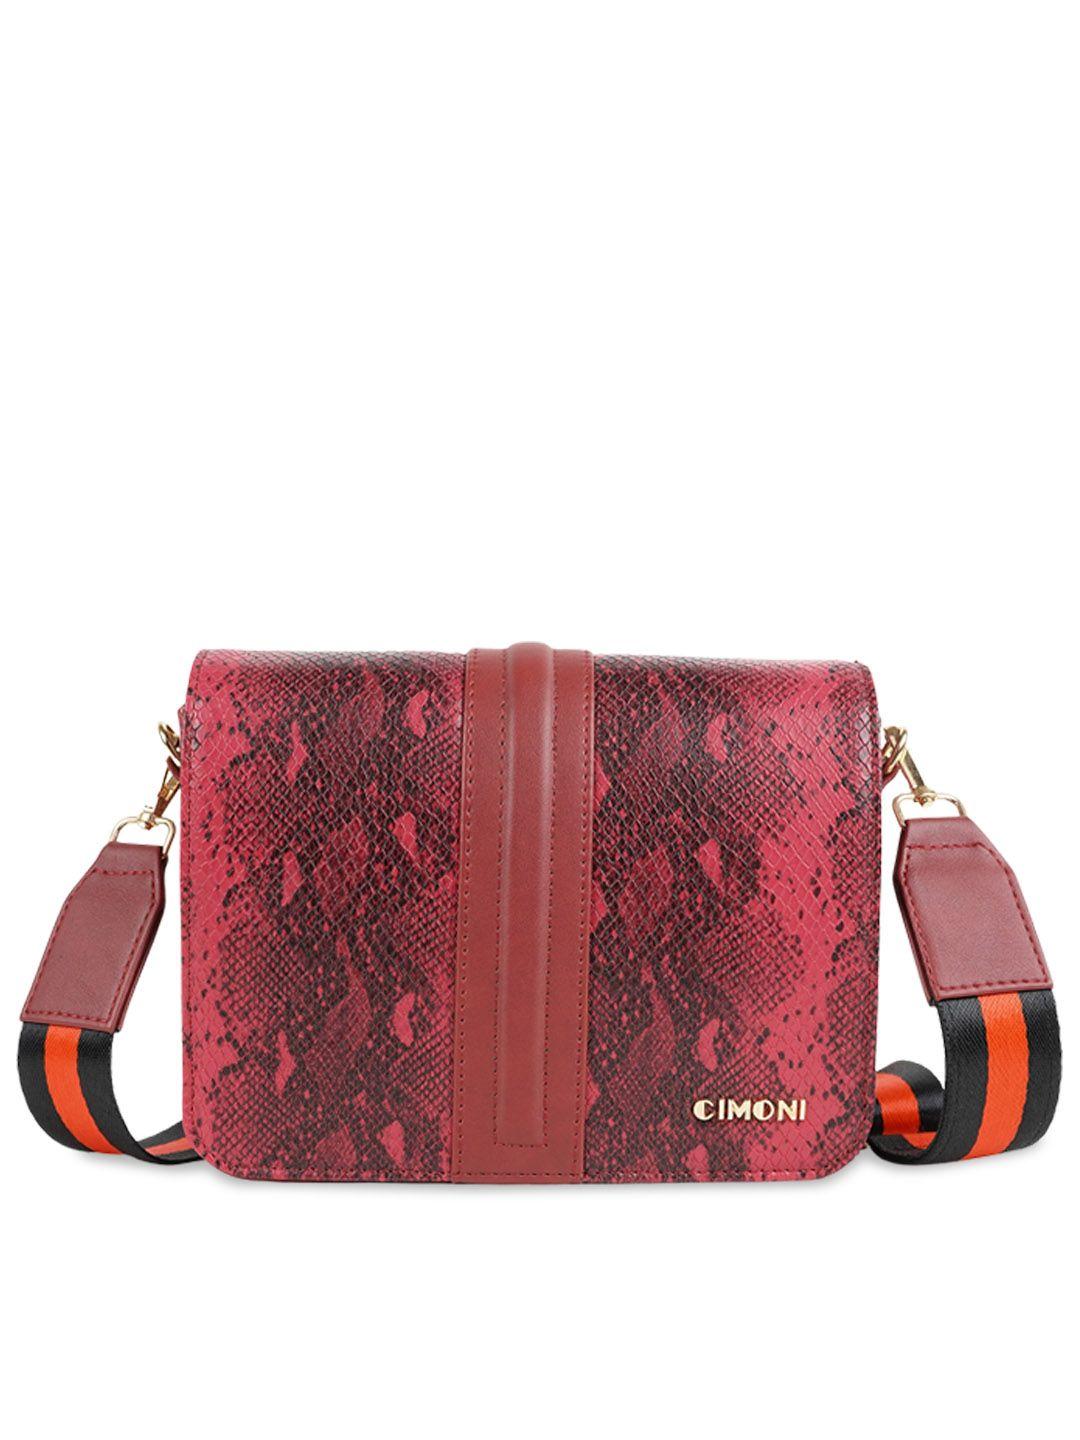 cimoni abstract textured structured sling bag